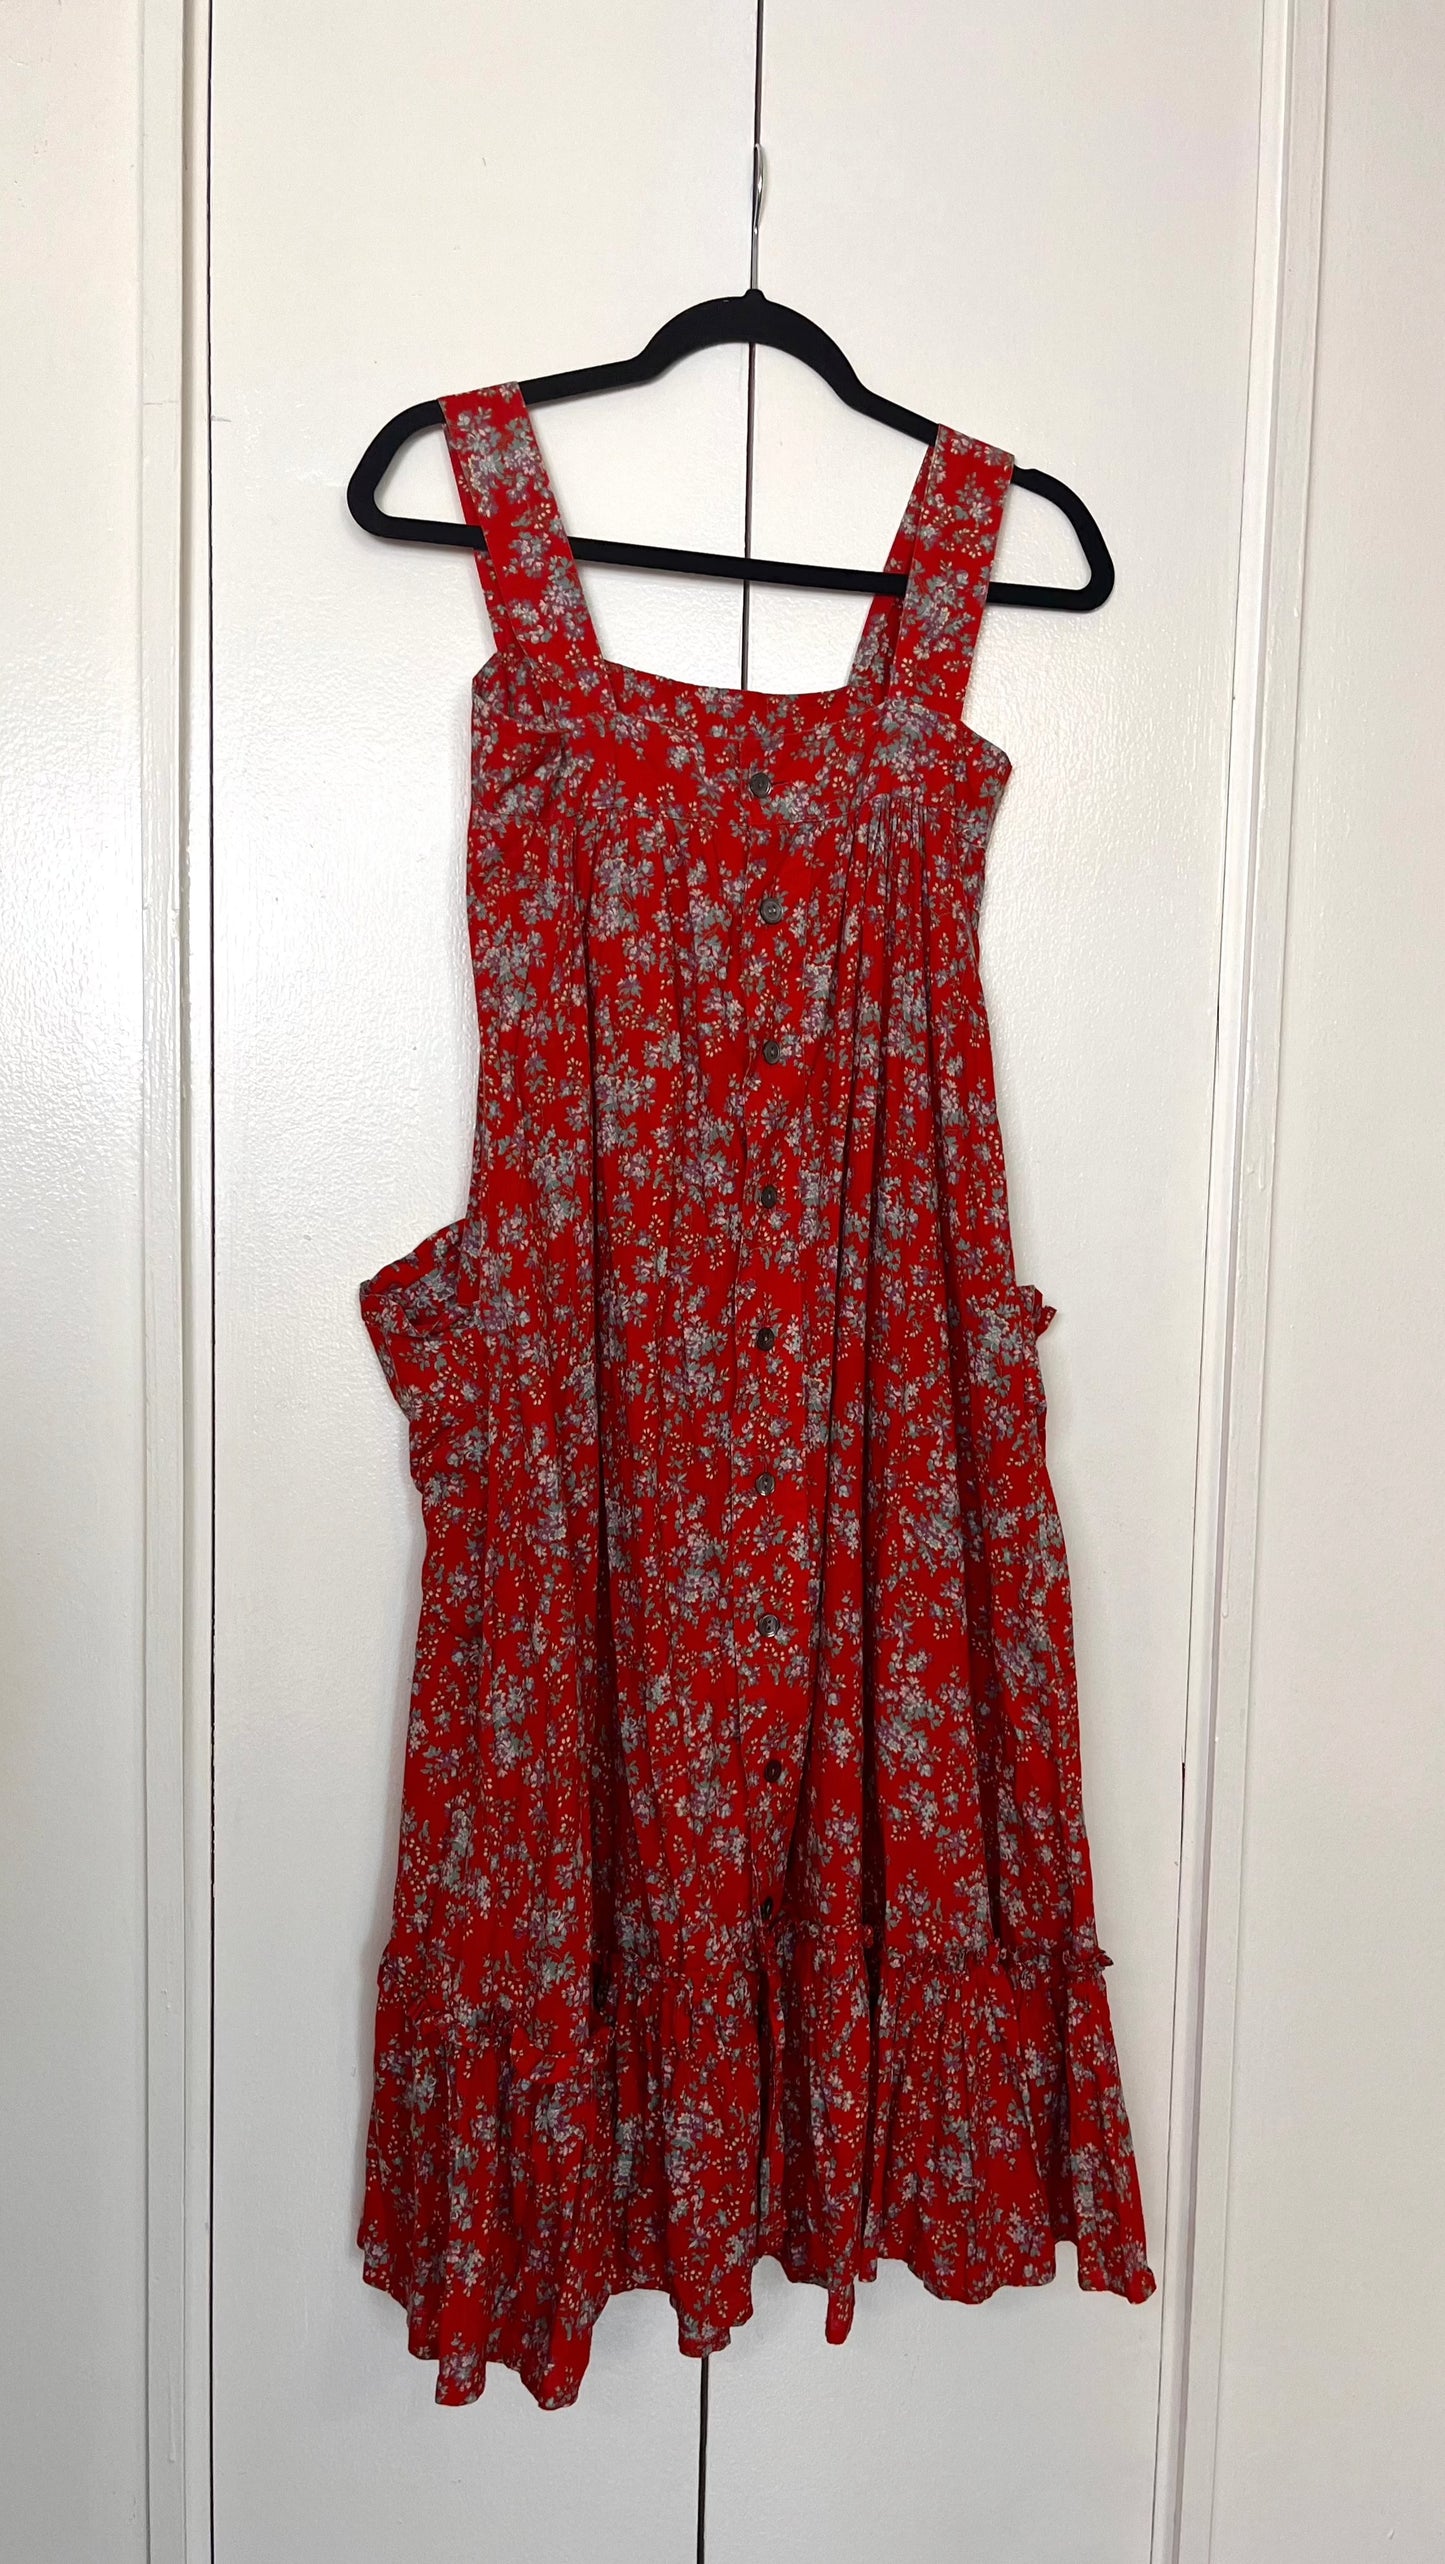 Vintage 1970's "Laura Ashley" (Carno Label) Red Calico Tent Dress